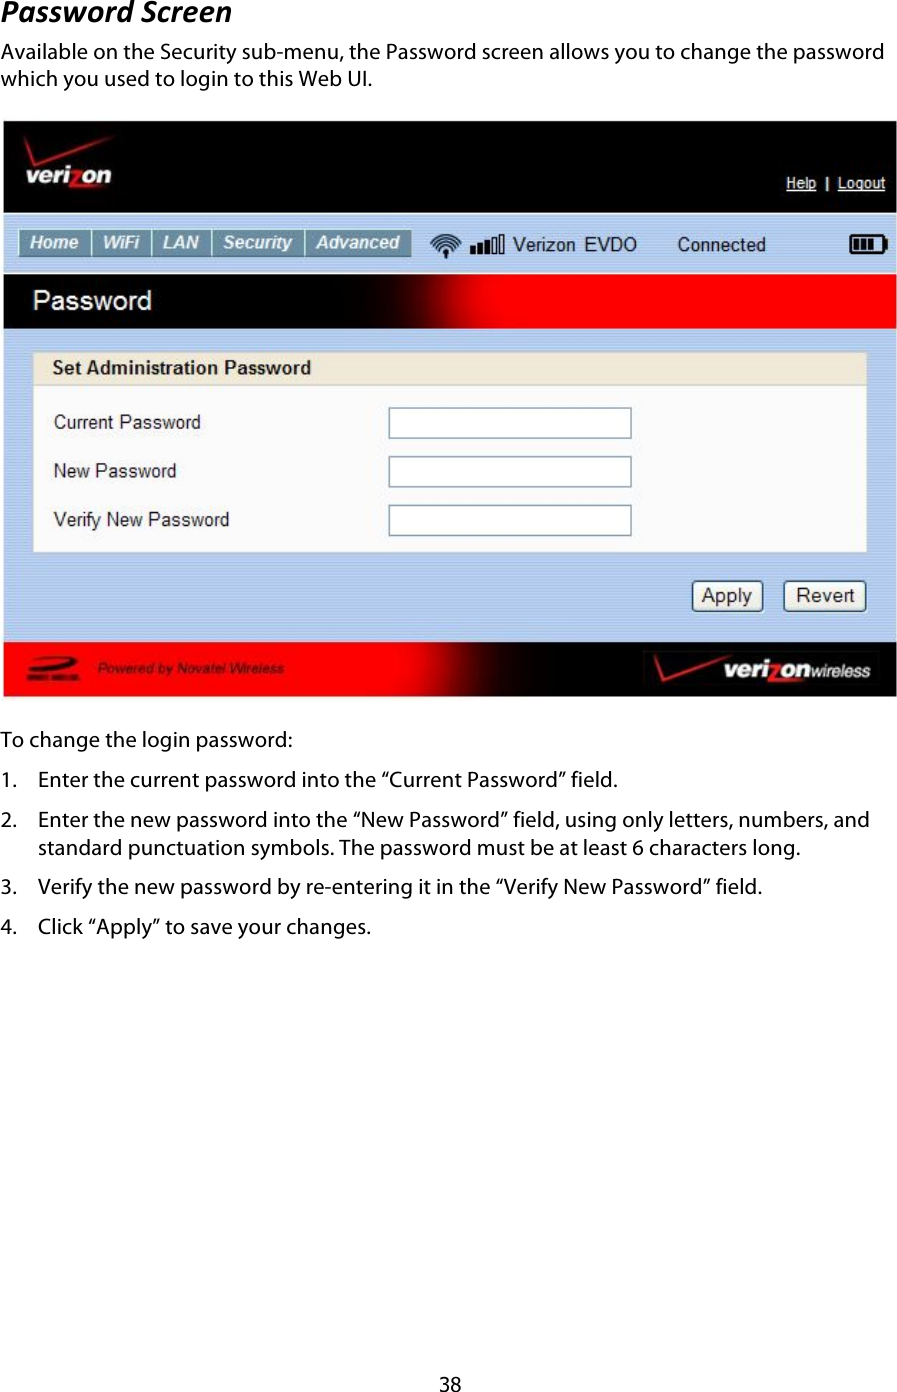  38 ,-77J)6*$1.6##:$Available on the Security sub-menu, the Password screen allows you to change the password which you used to login to this Web UI.  To change the login password: 1. Enter the current password into the “Current Password” field. 2. Enter the new password into the “New Password” field, using only letters, numbers, and standard punctuation symbols. The password must be at least 6 characters long. 3. Verify the new password by re-entering it in the “Verify New Password” field. 4. Click “Apply” to save your changes. 